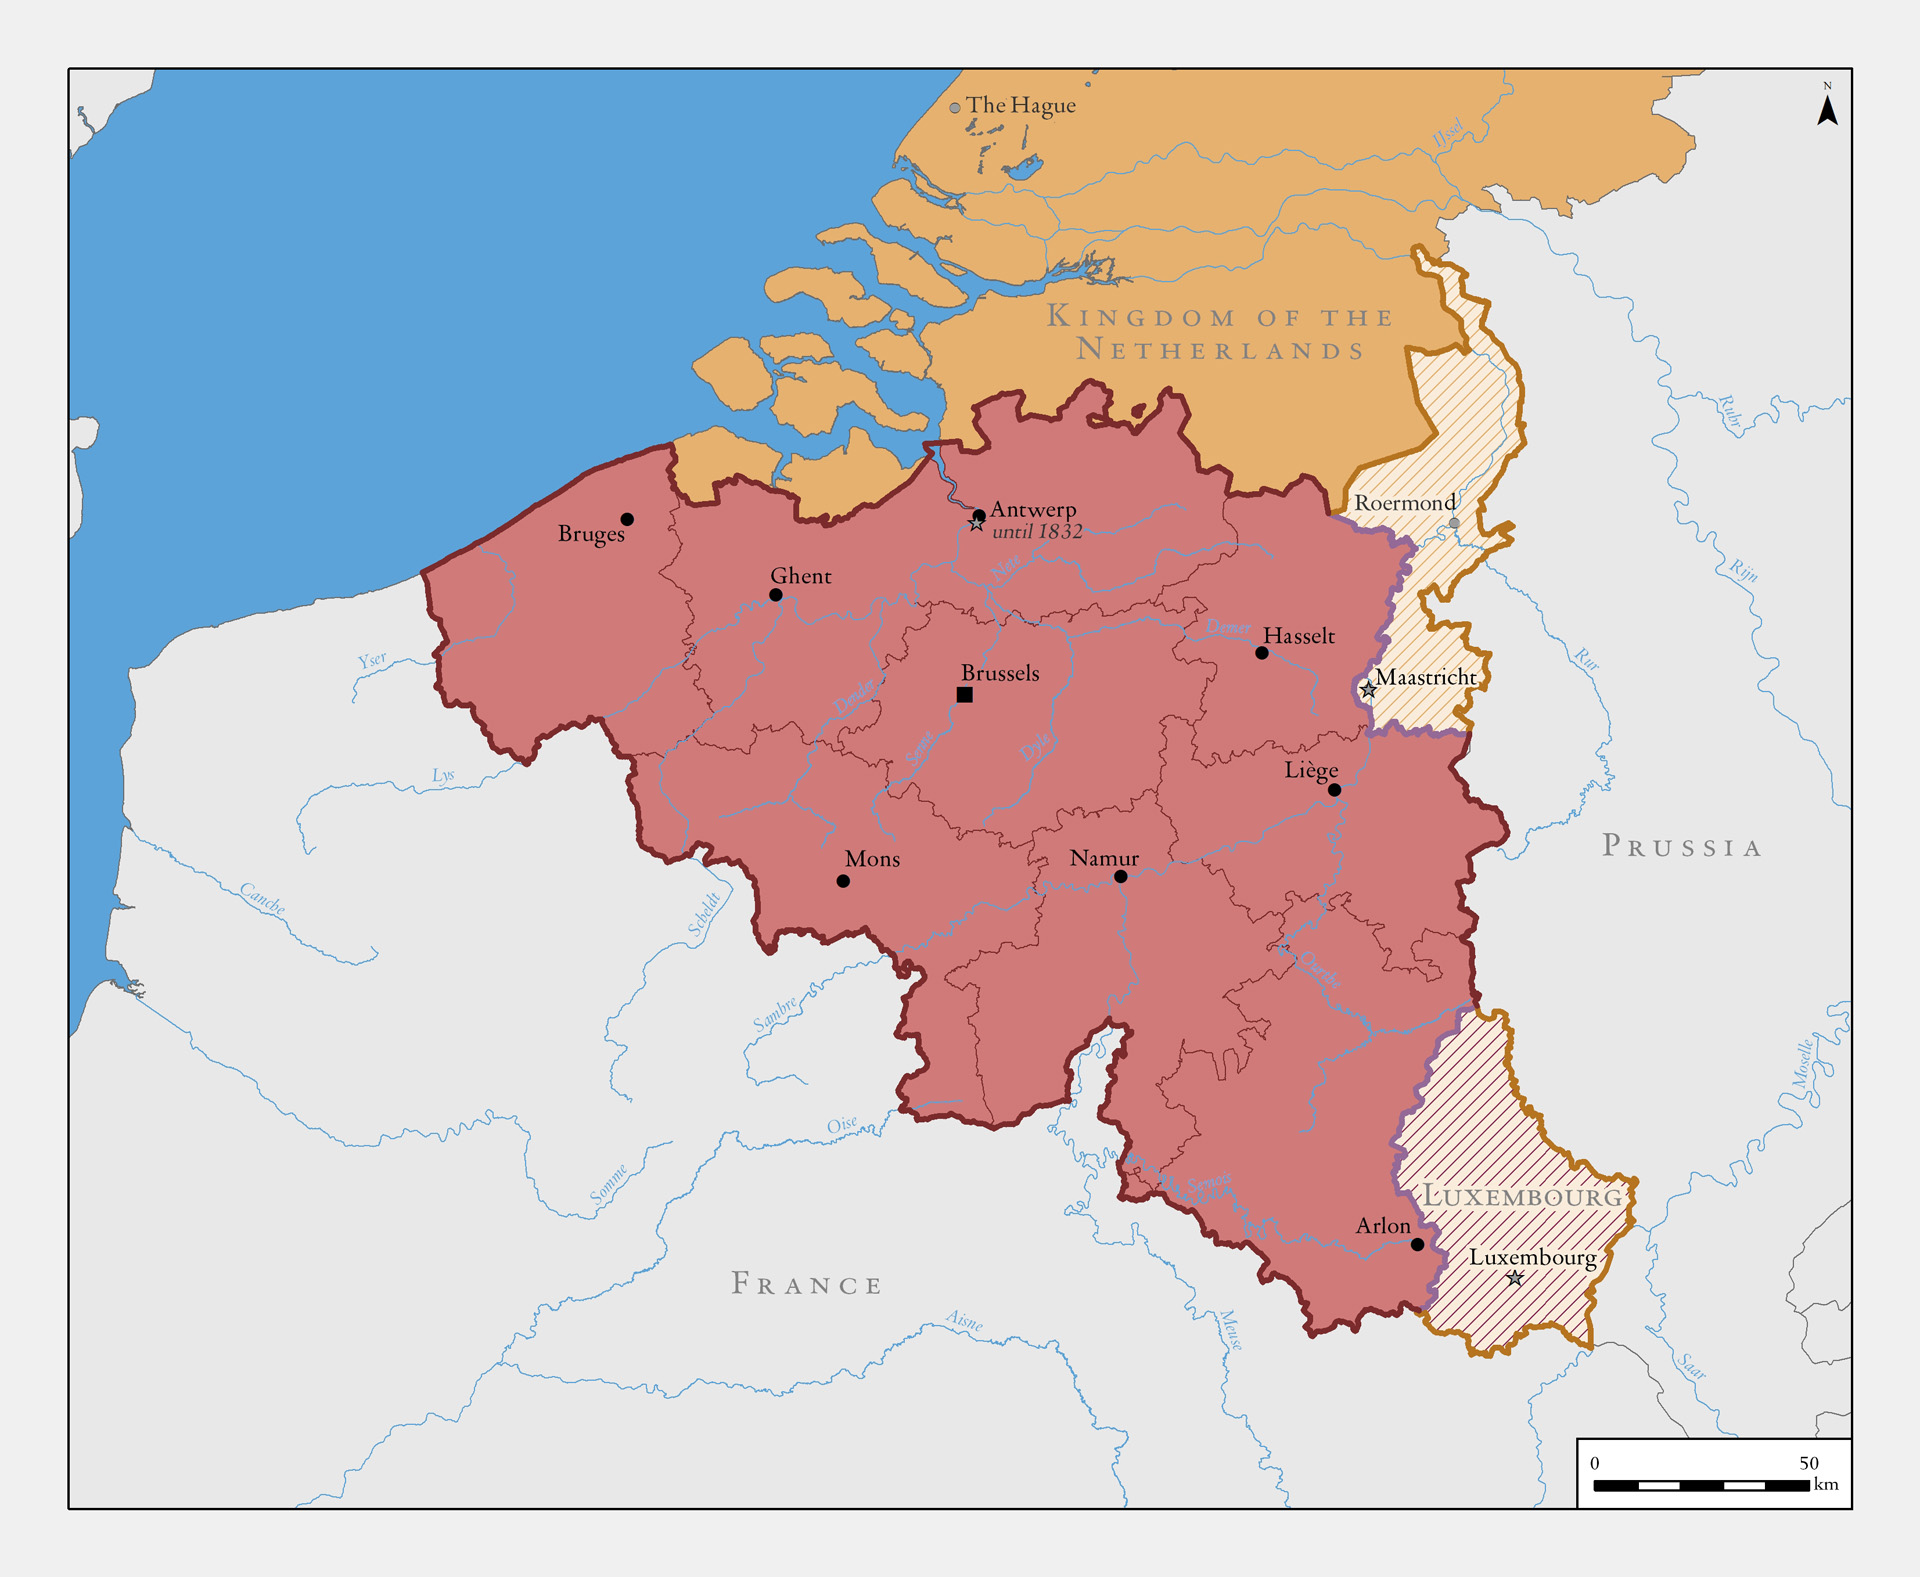 The creation of the Kingdom of Belgium, 1830-1839